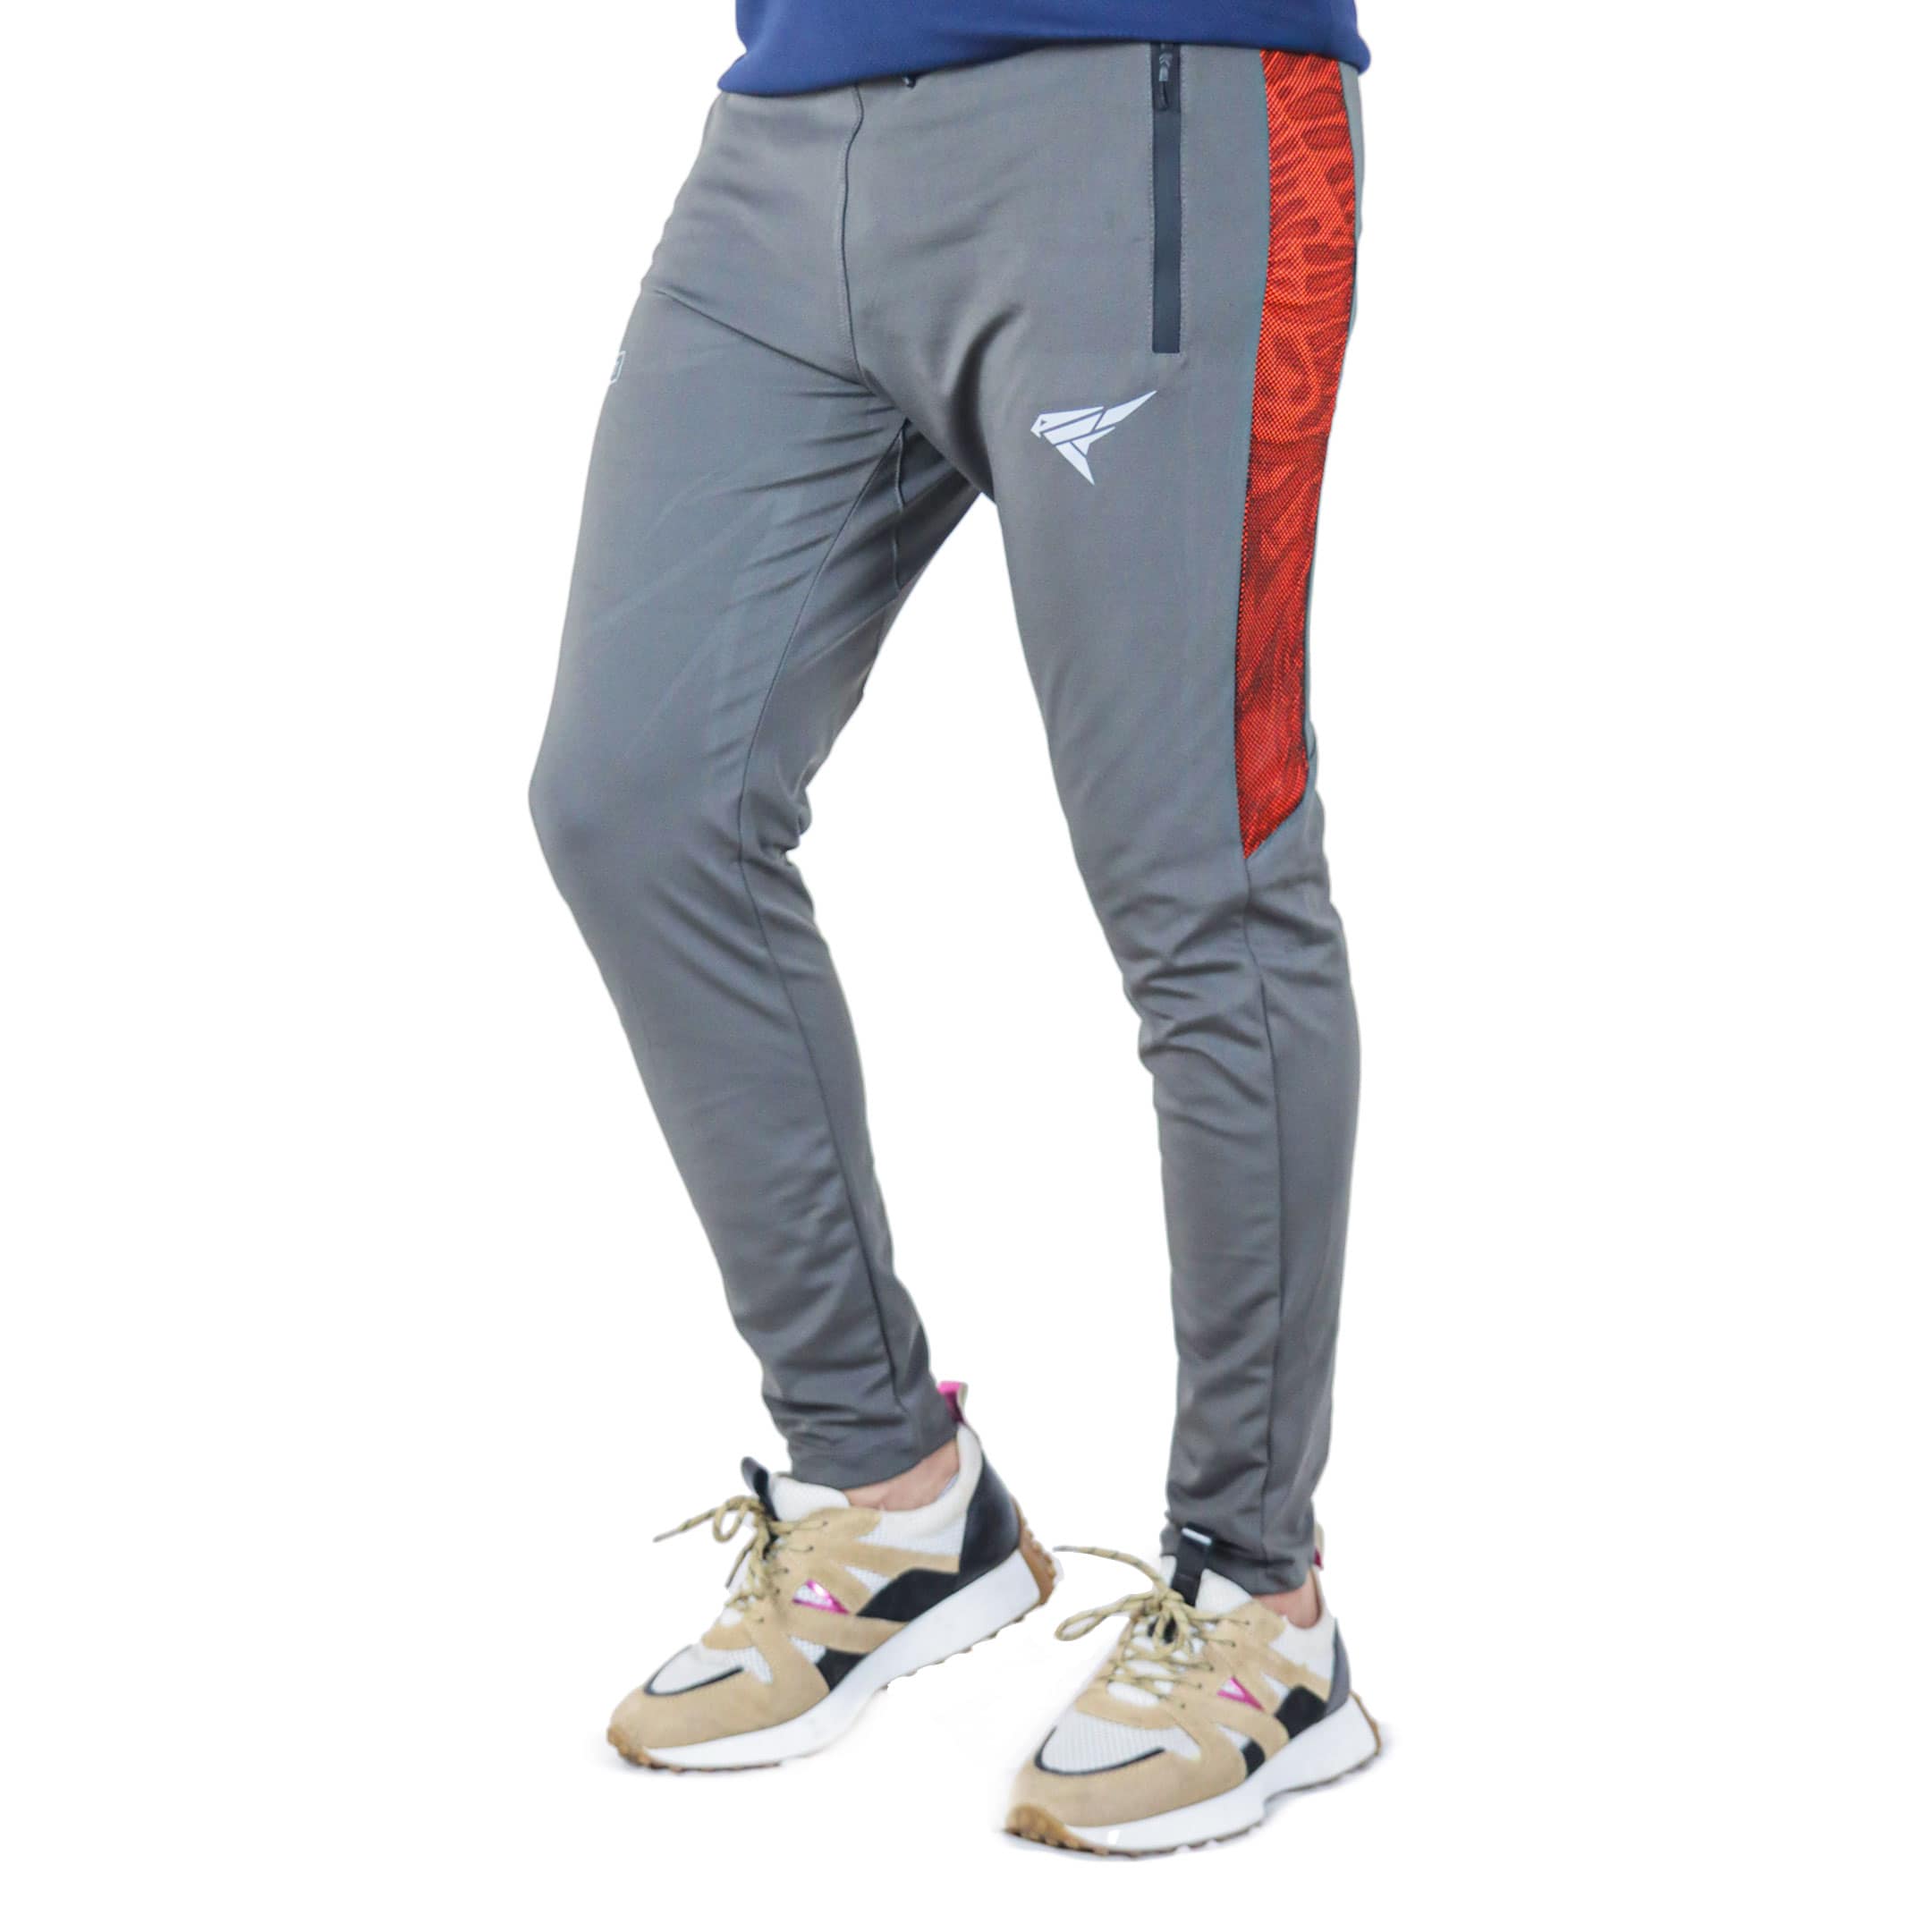 Gray with Red Panel Quick Dry Trouser.